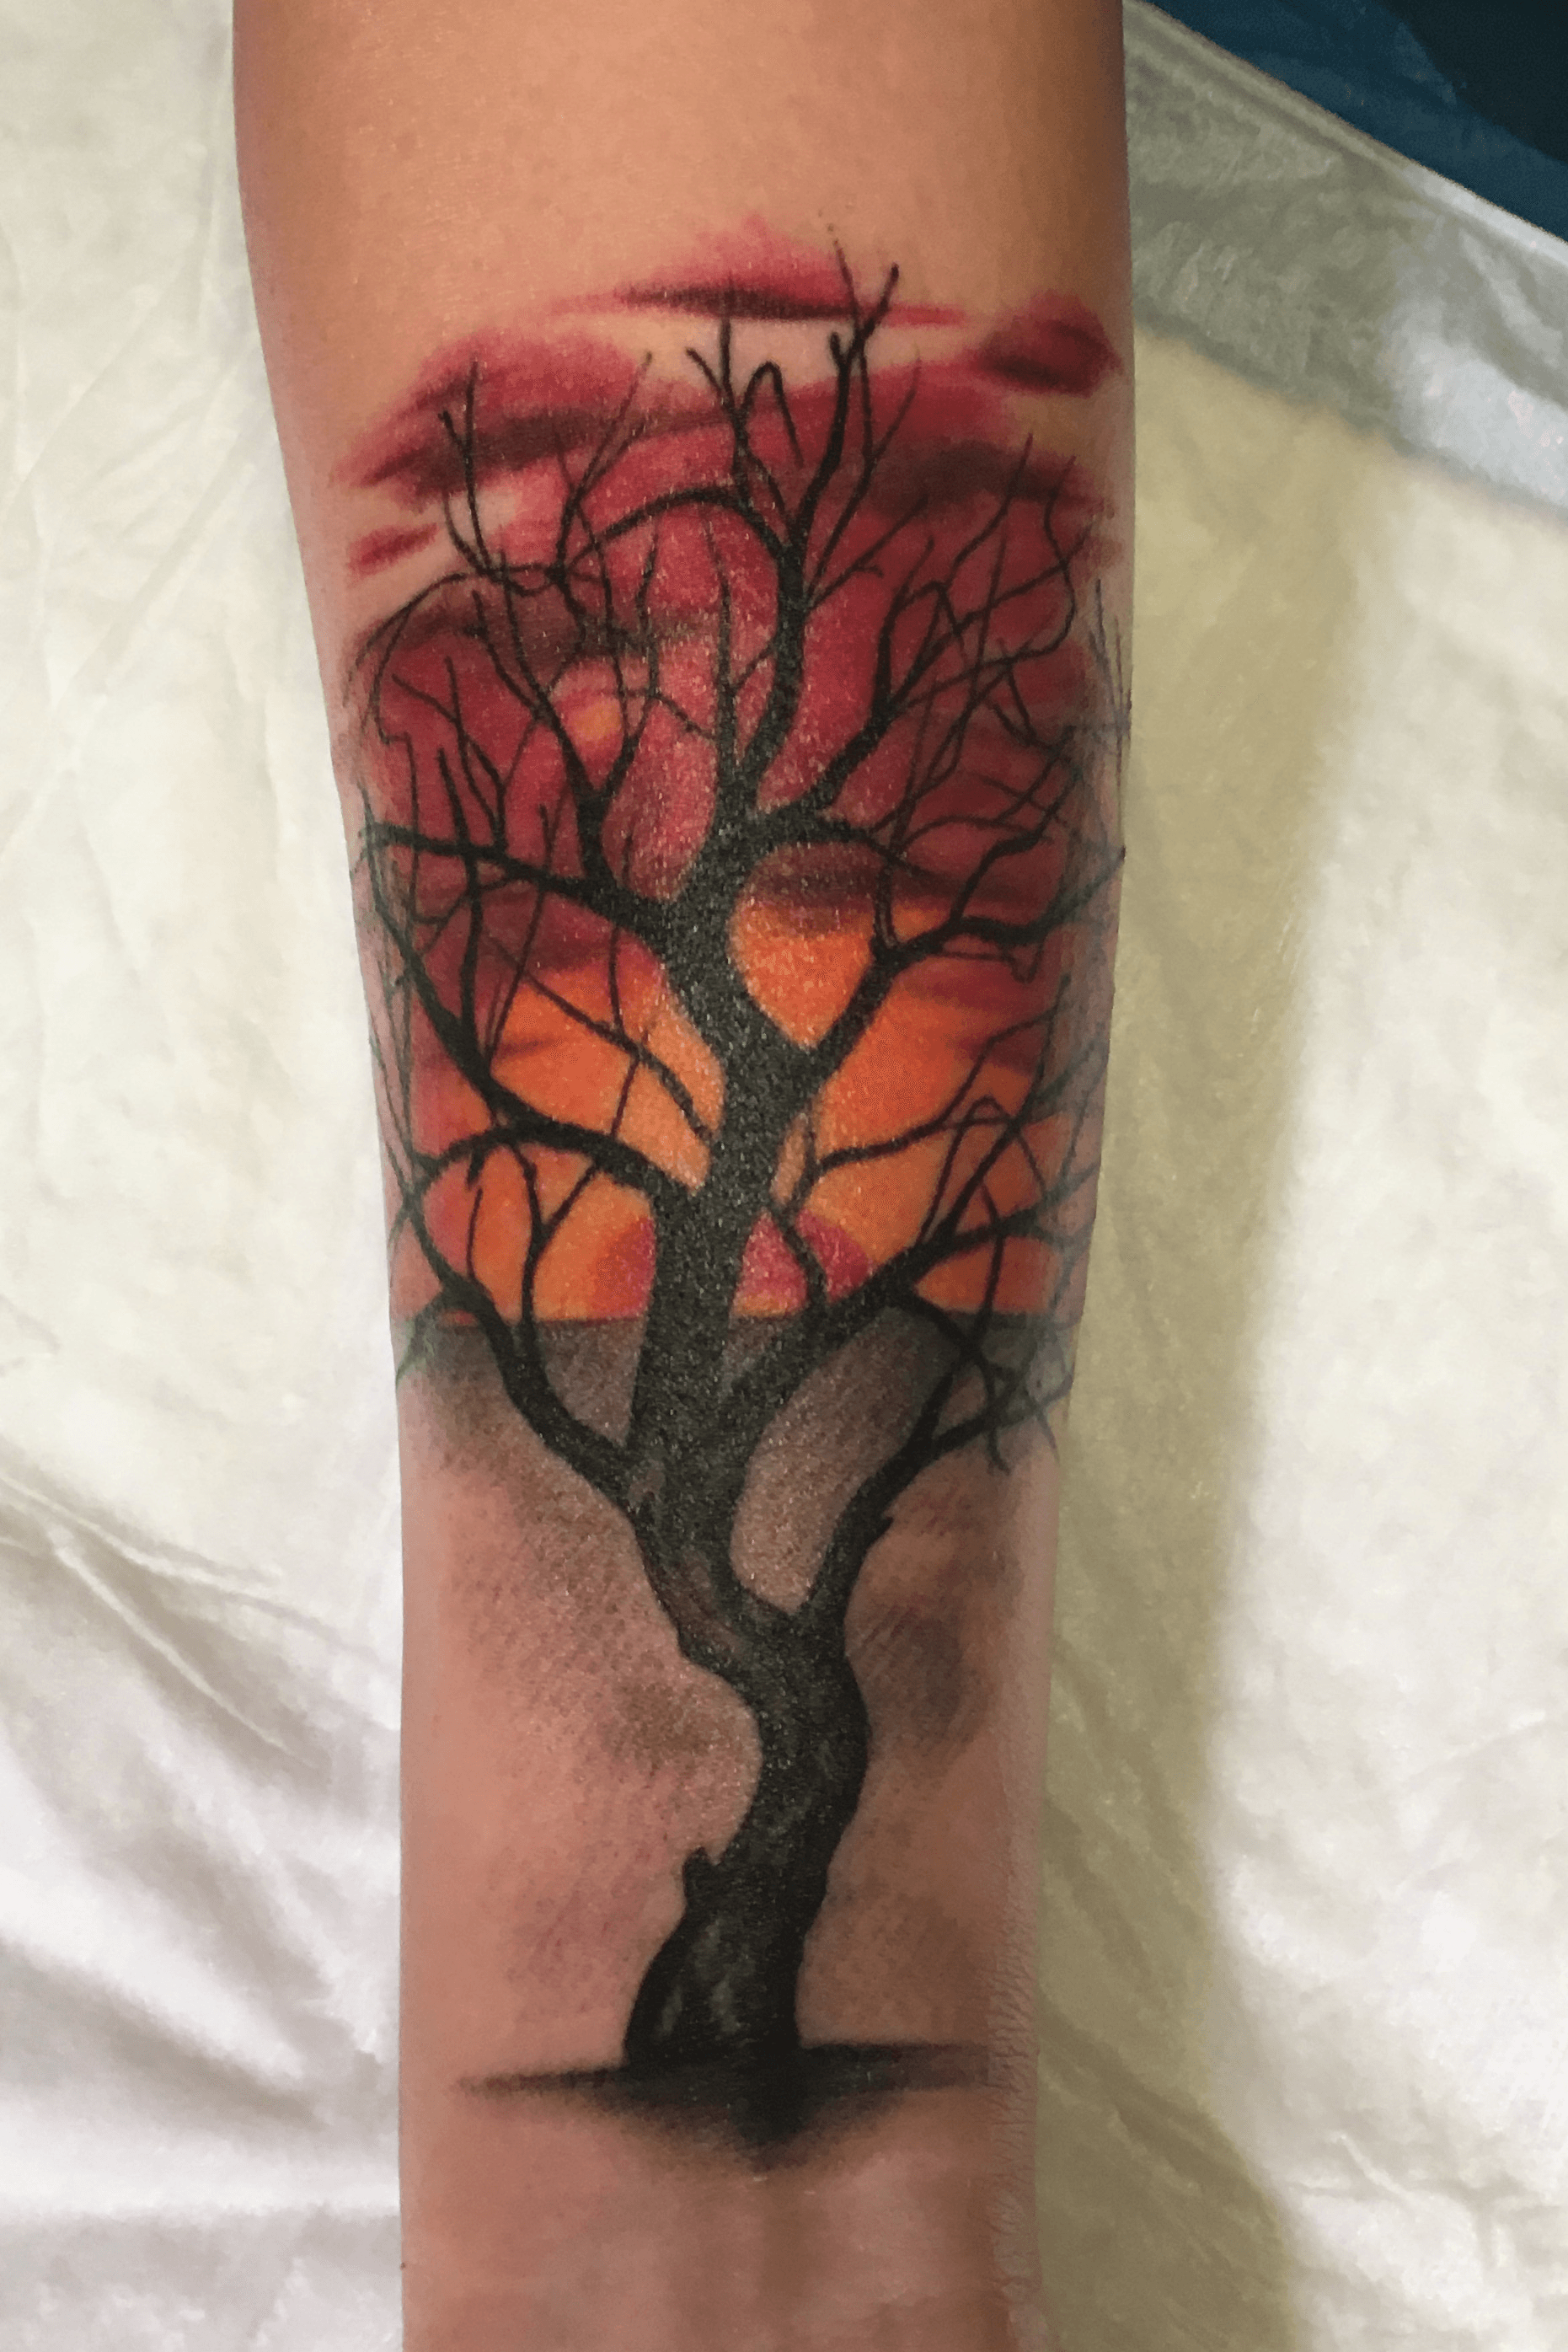 Locke Studios  Moses and the burning bush tattoo done by Andy Locke at  Locke Studios Tattoo and Piercing Gettysburg Pa Thanks for looking   Facebook